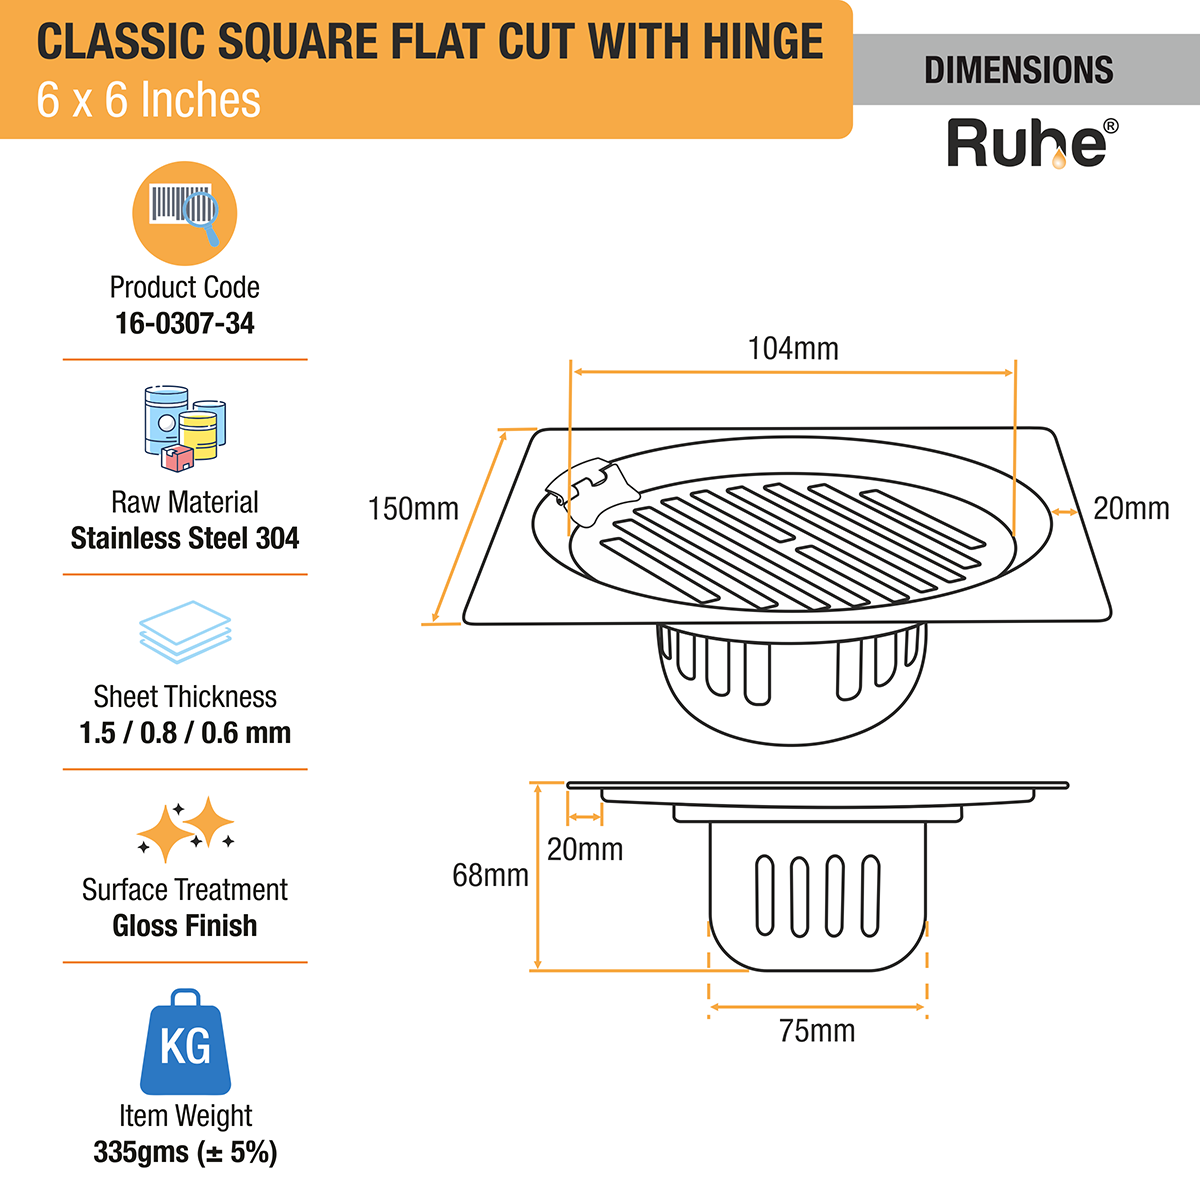 Classic Square Flat Cut Floor Drain (6 x 6 Inches) with Hinge & Cockroach Trap (304 Grade) dimensions and size